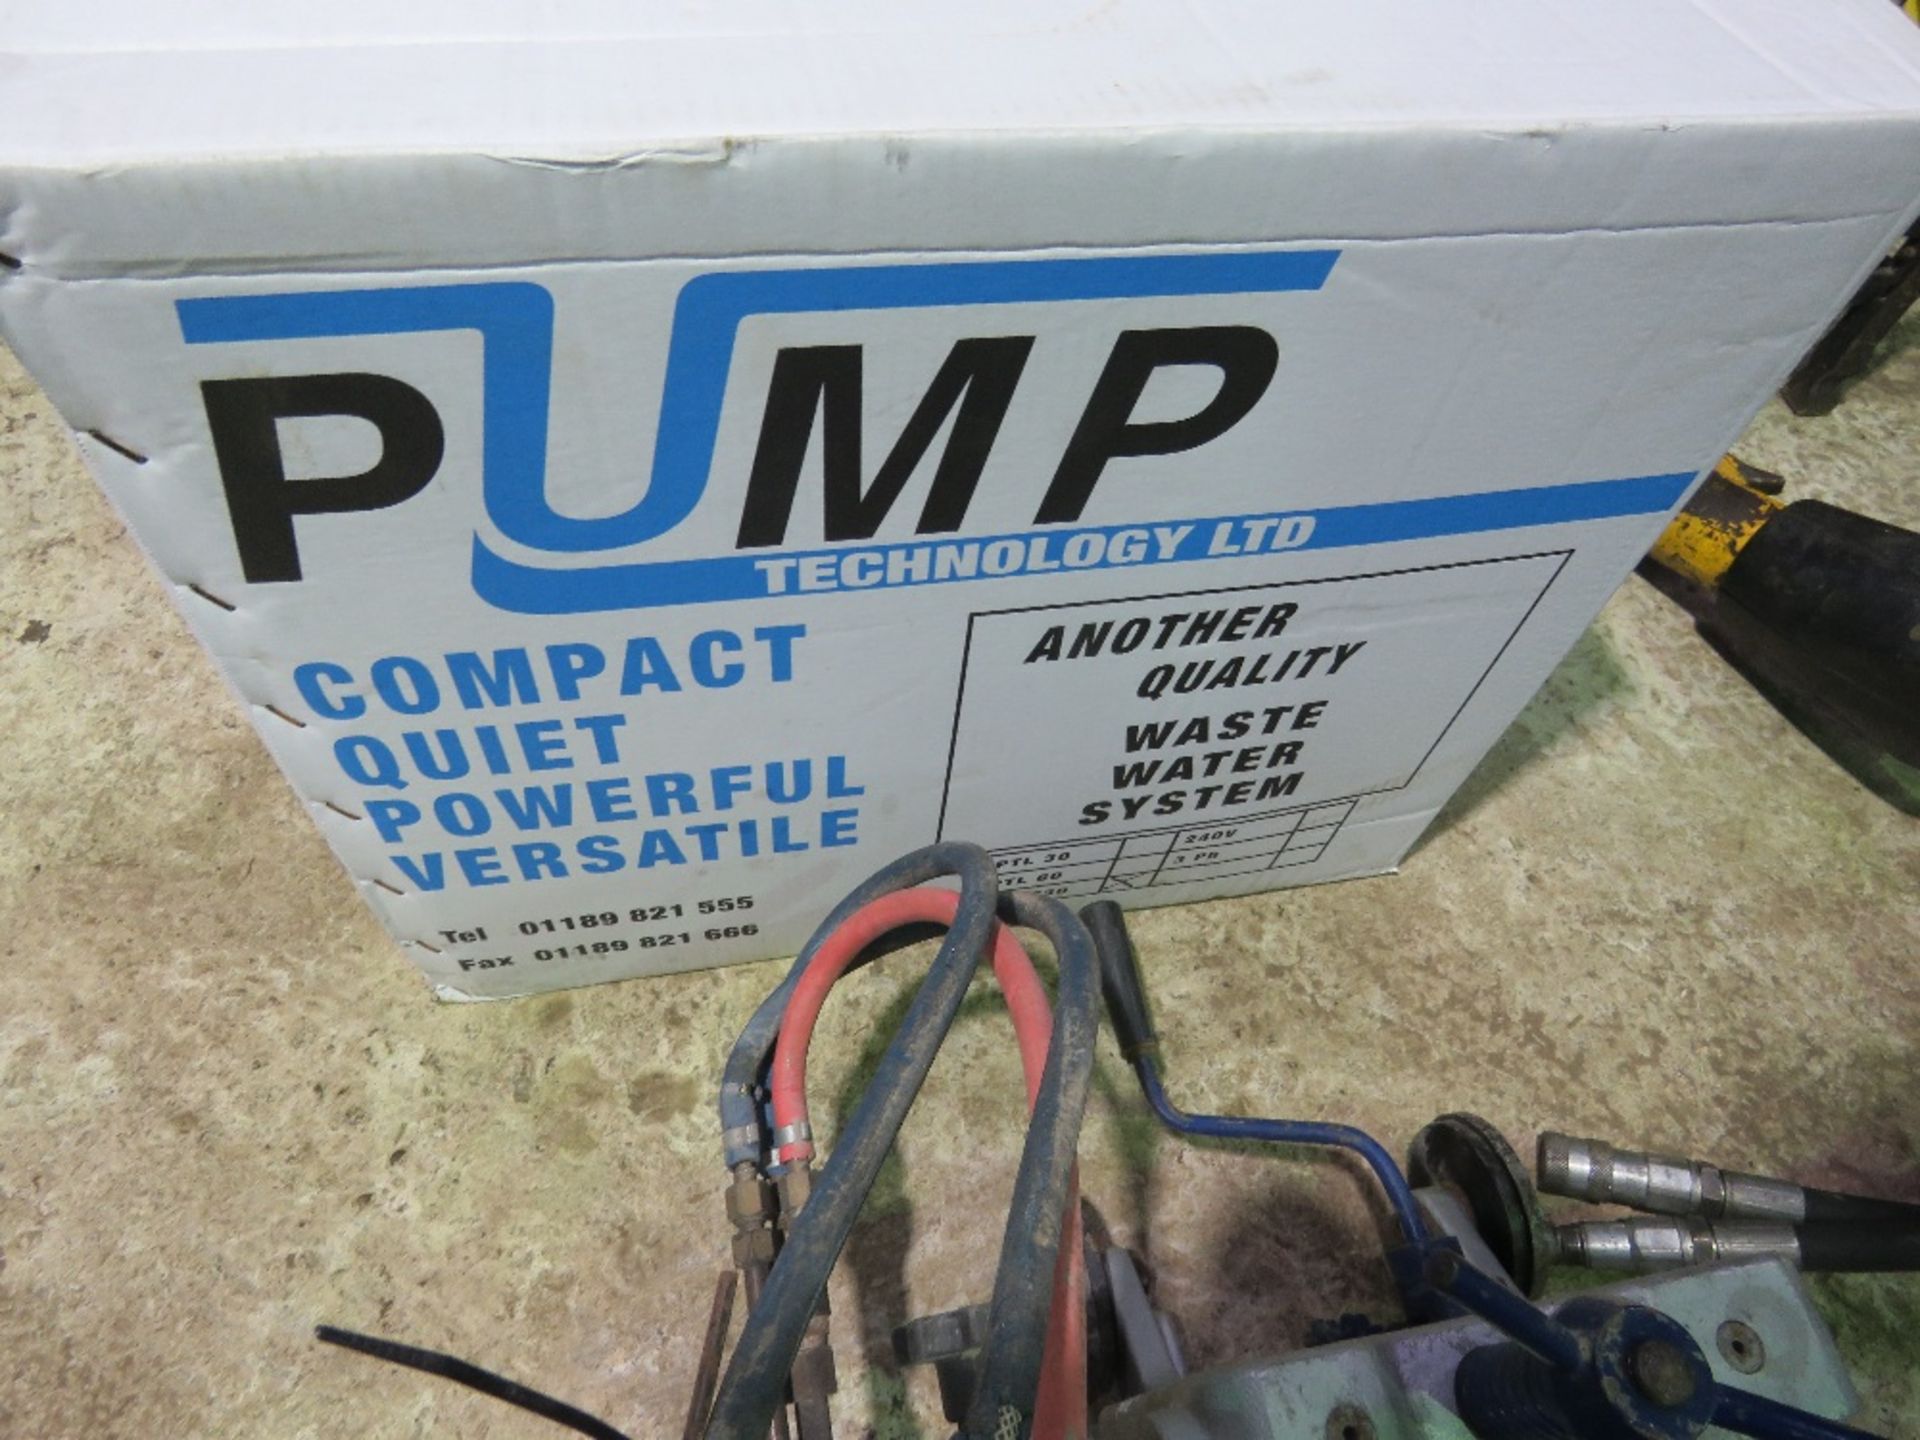 PUMP TECHNOLOGY PTL730 WATER PUMPING TANK UNIT, BOXED, APPEARS UNUSED.....THIS LOT IS SOLD UNDER THE - Image 2 of 5